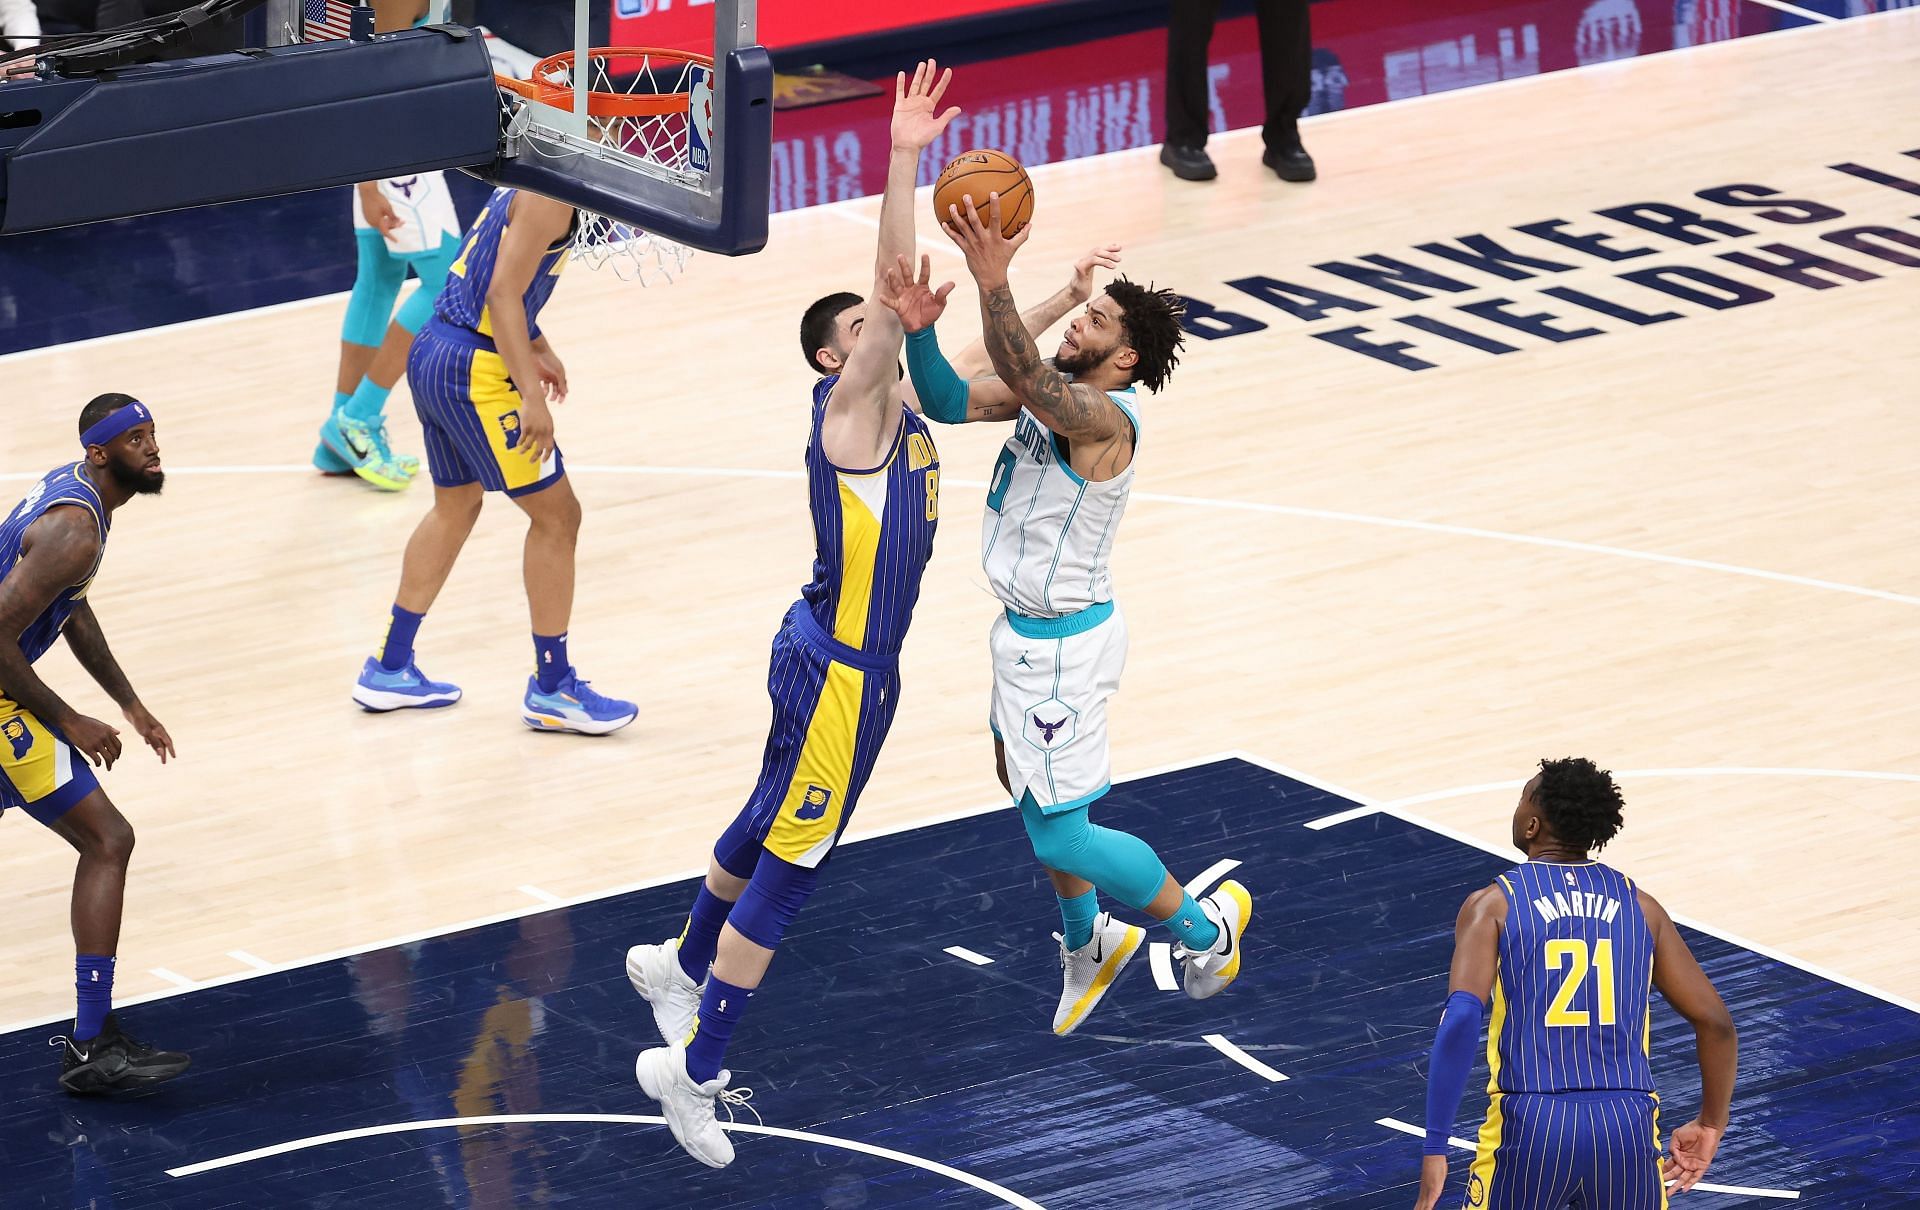 The Charlotte Hornets and the Indiana Pacers will face off in the NBA regular season on Wednesday